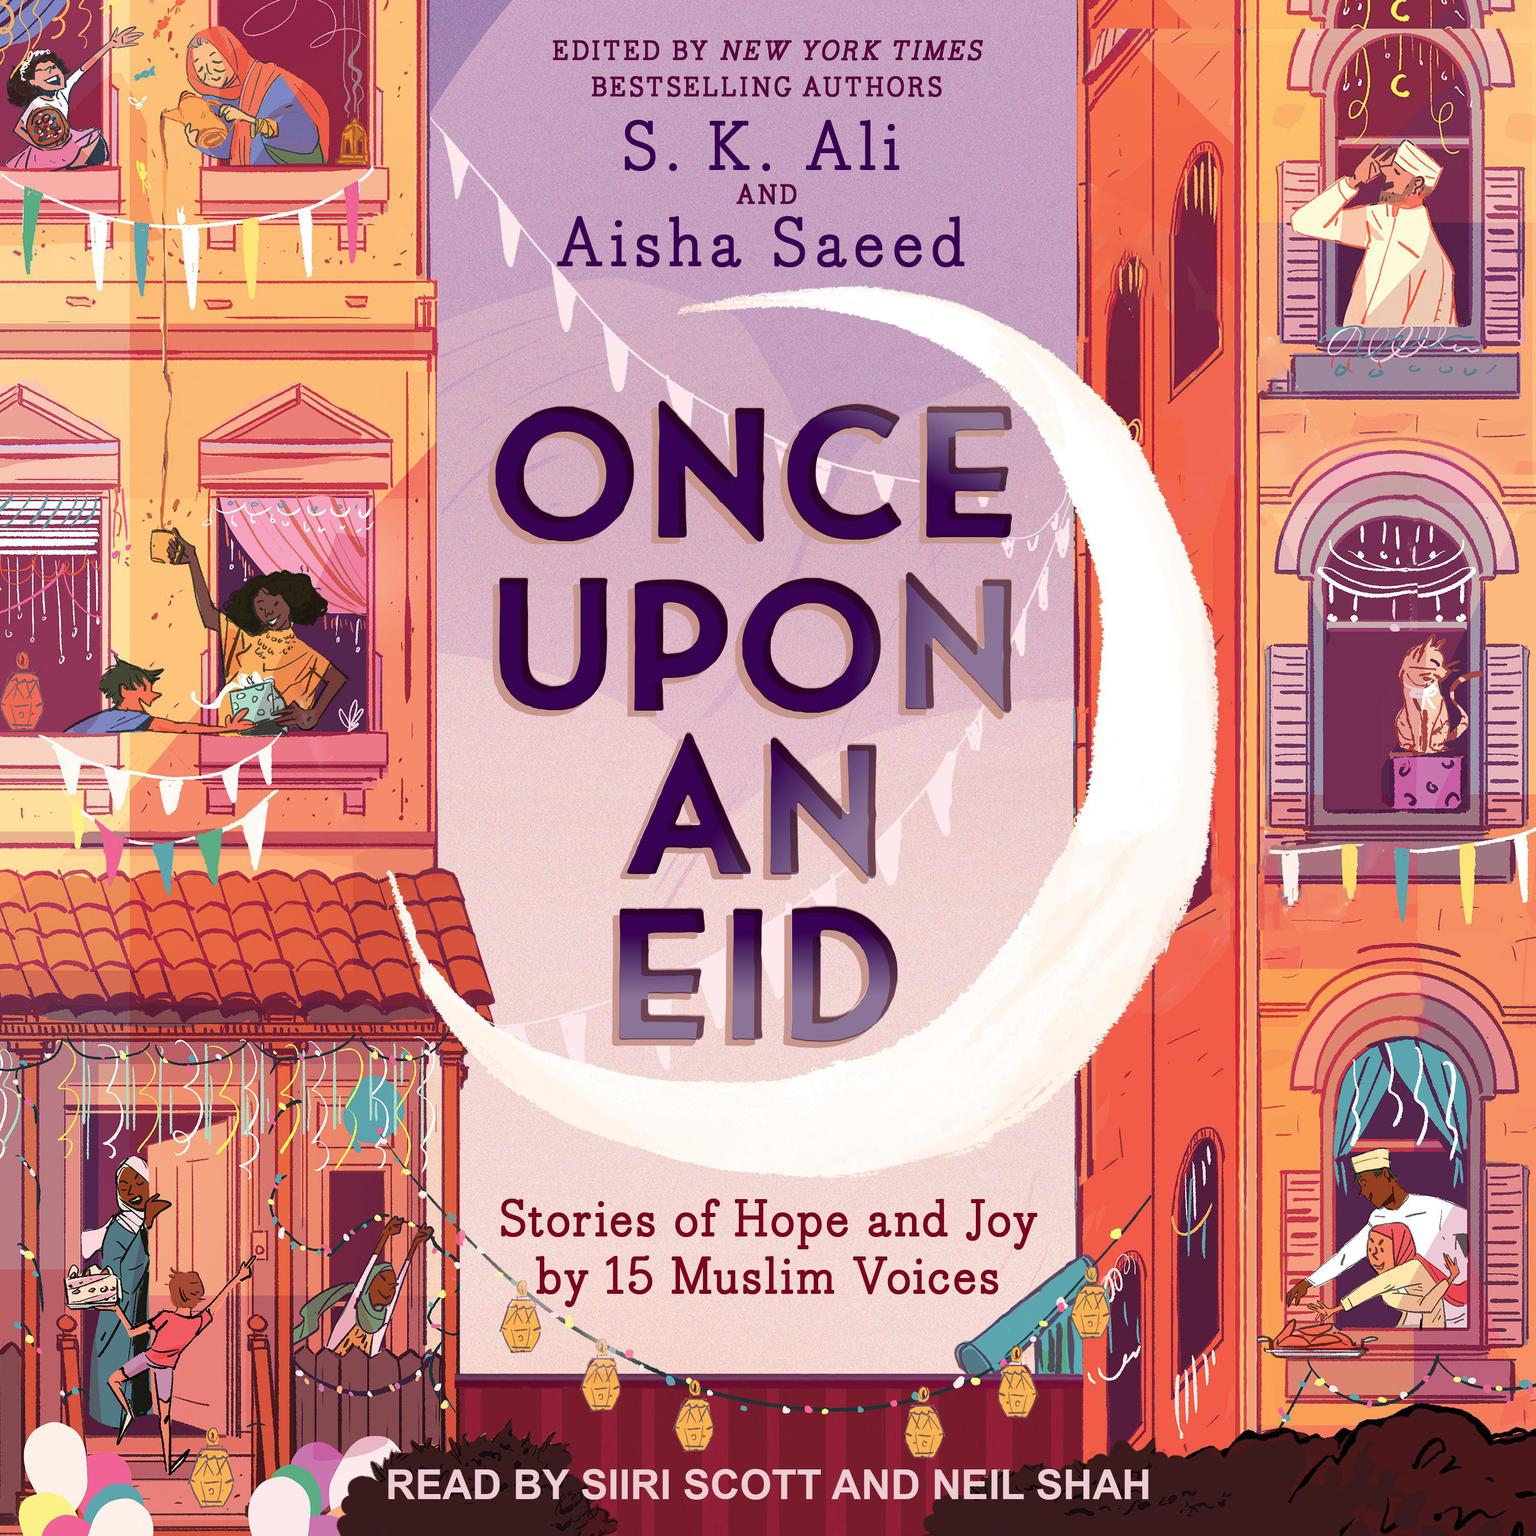 Once Upon an Eid: Stories of Hope and Joy by 15 Muslim Voices Audiobook, by S. K. Ali